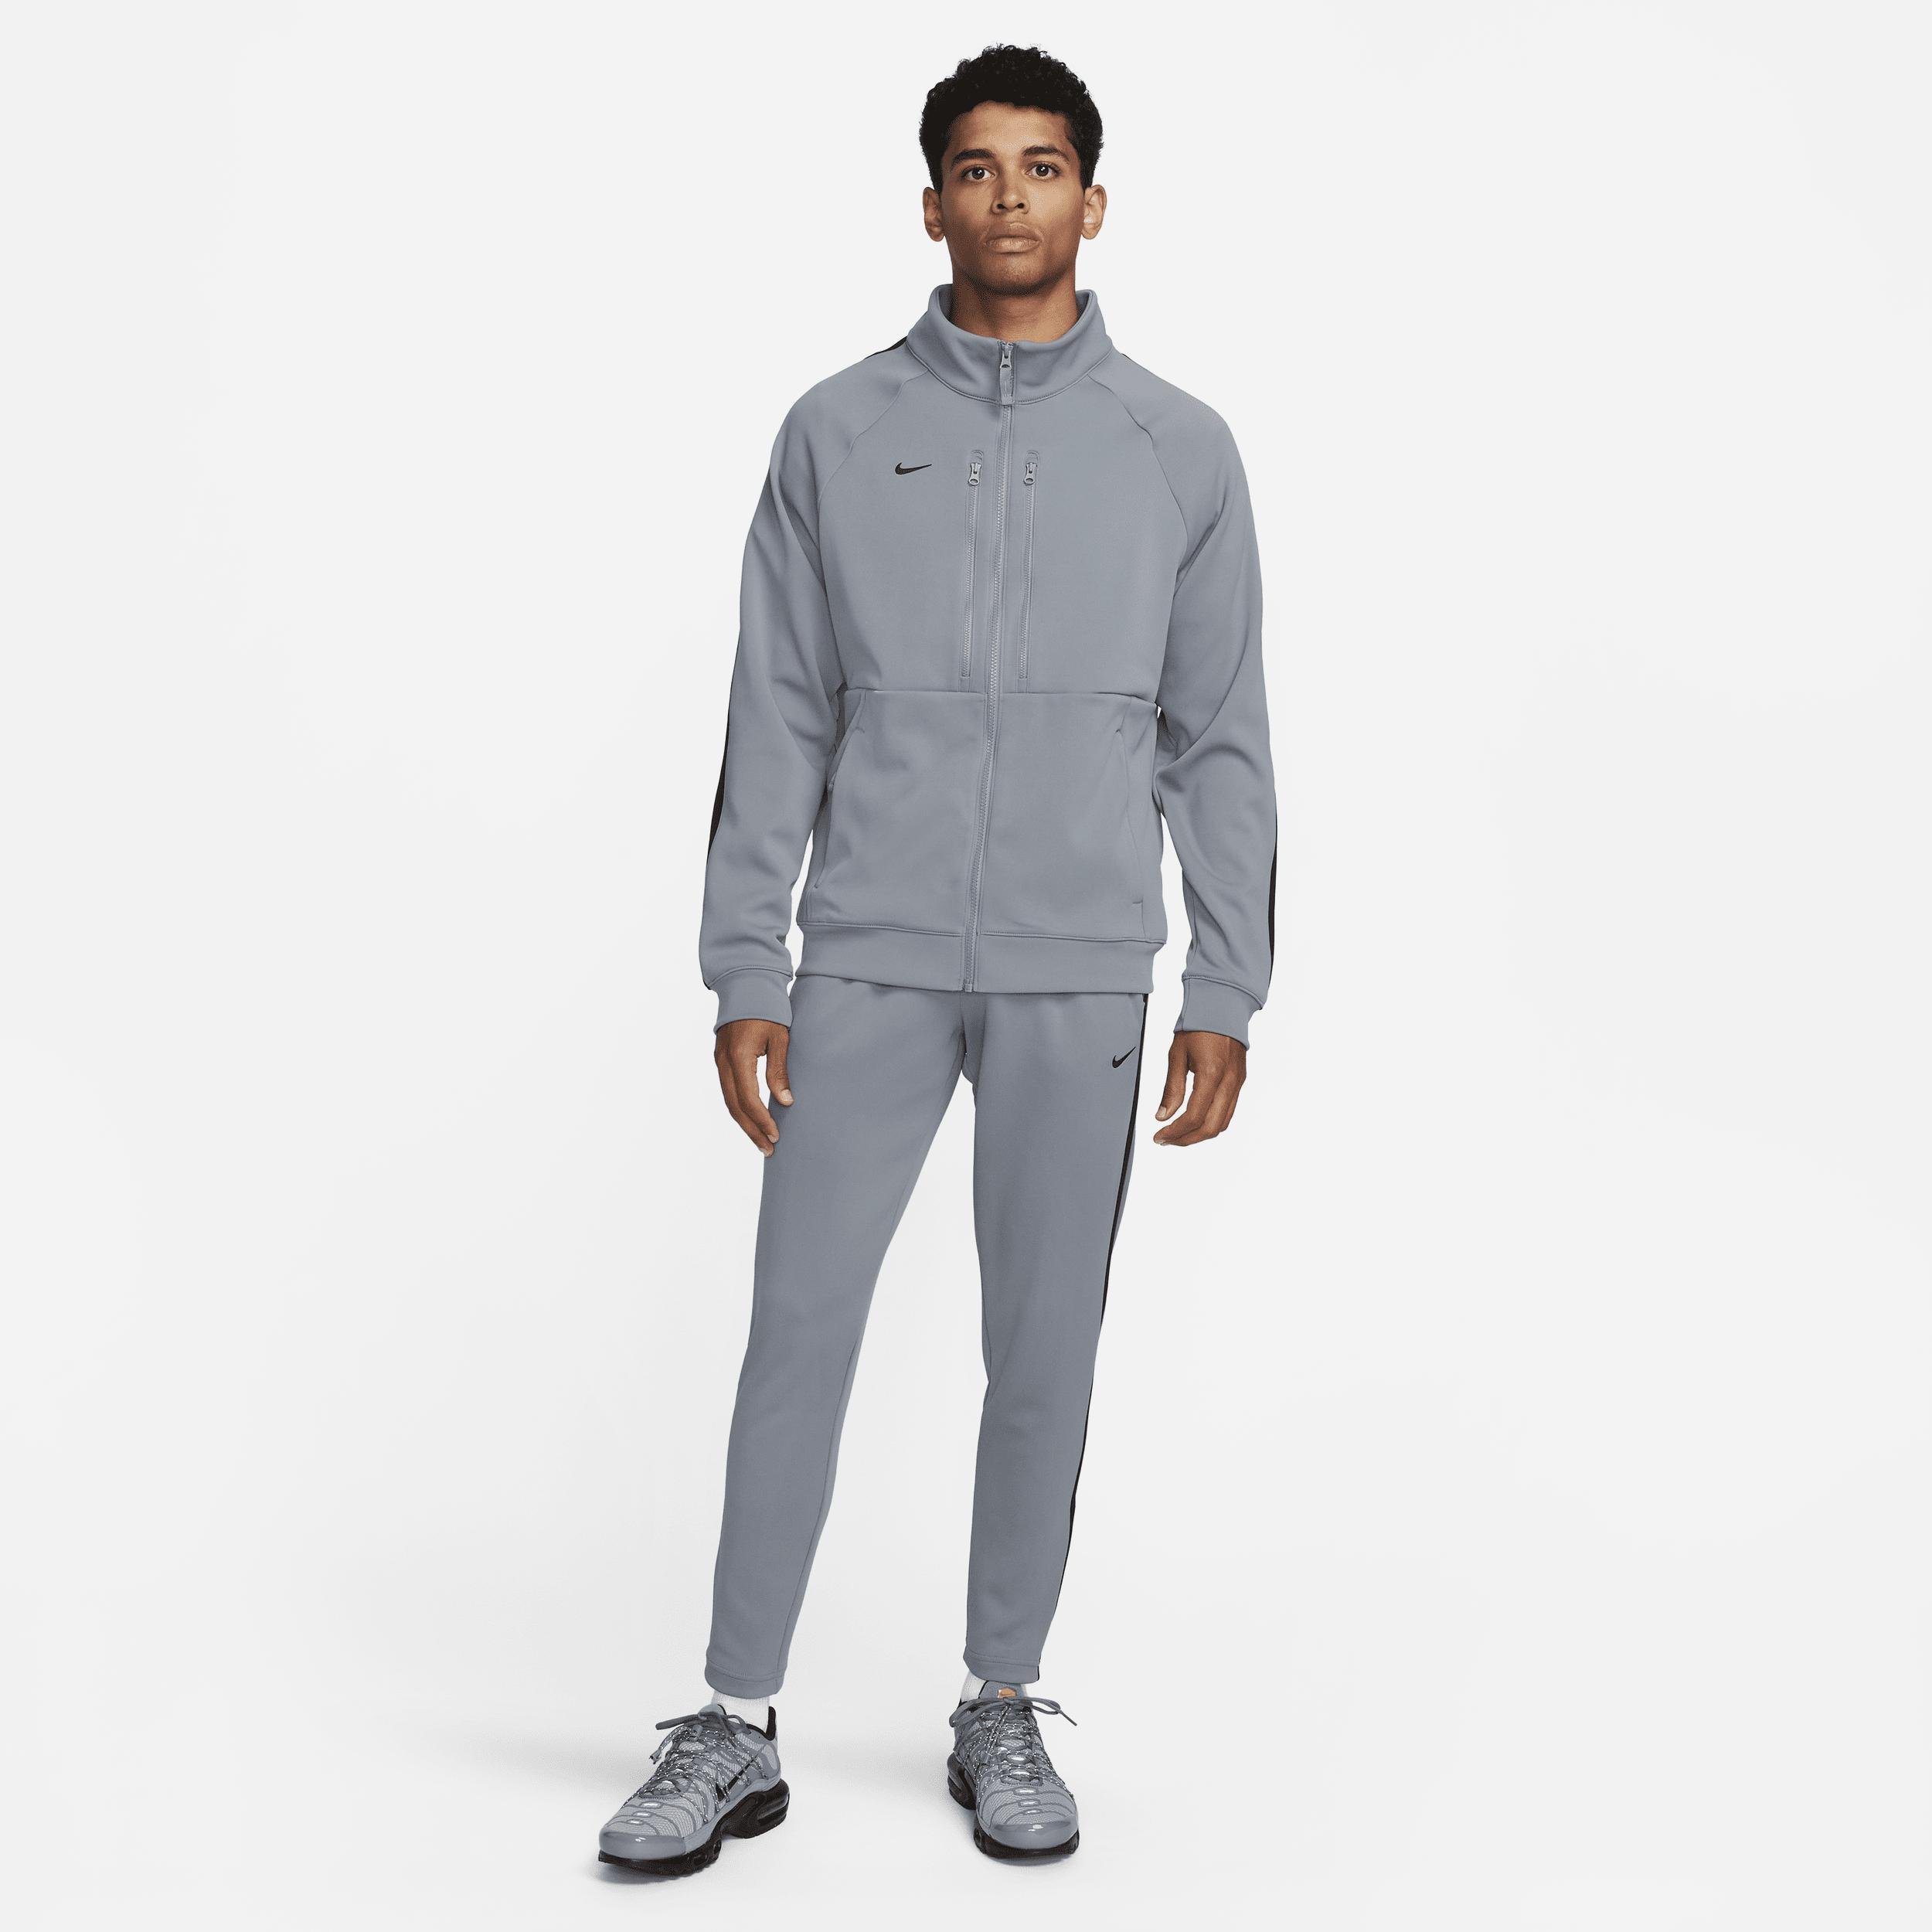 Nike Men's Culture of Football Dri-FIT Soccer Tracksuit by NIKE